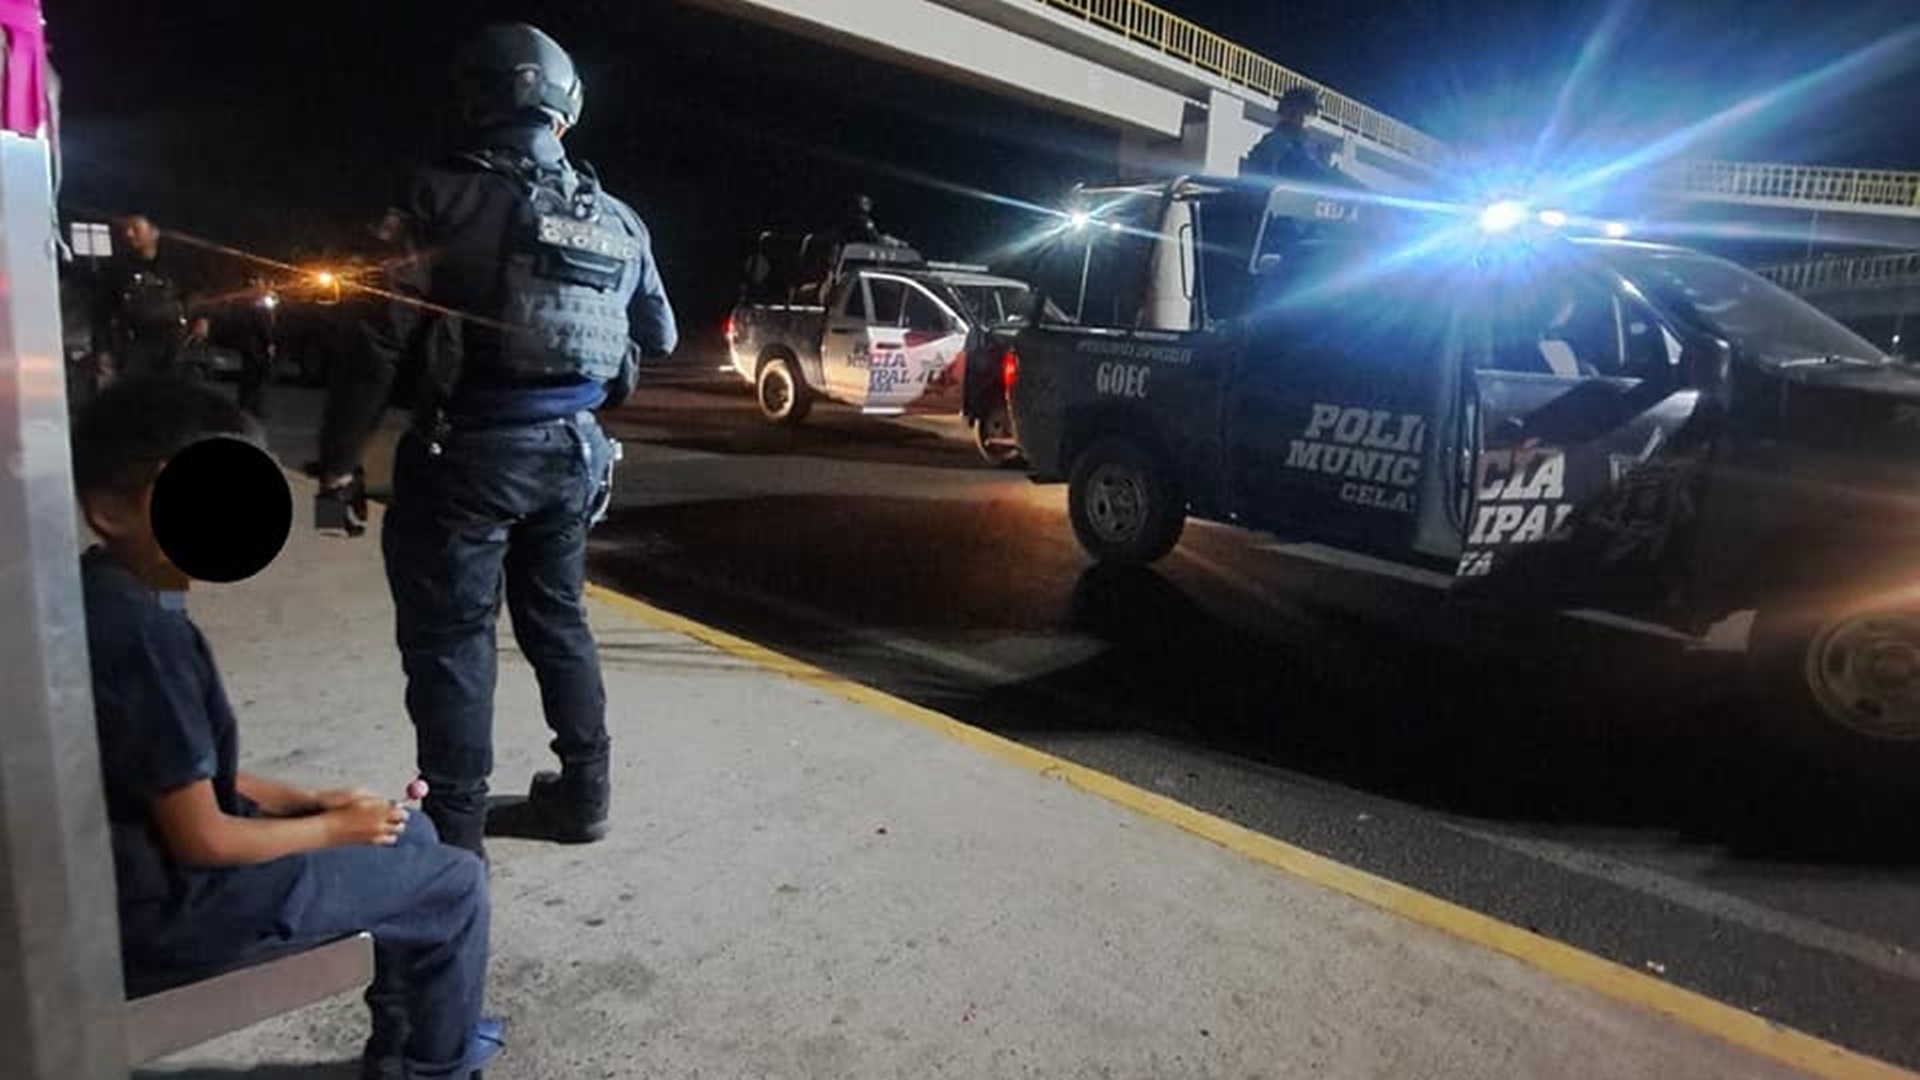 The event occurred in the Rincón de Tamayo community in the municipality of Celaya Photo: Facebook/ DireccionPoliciaCelaya